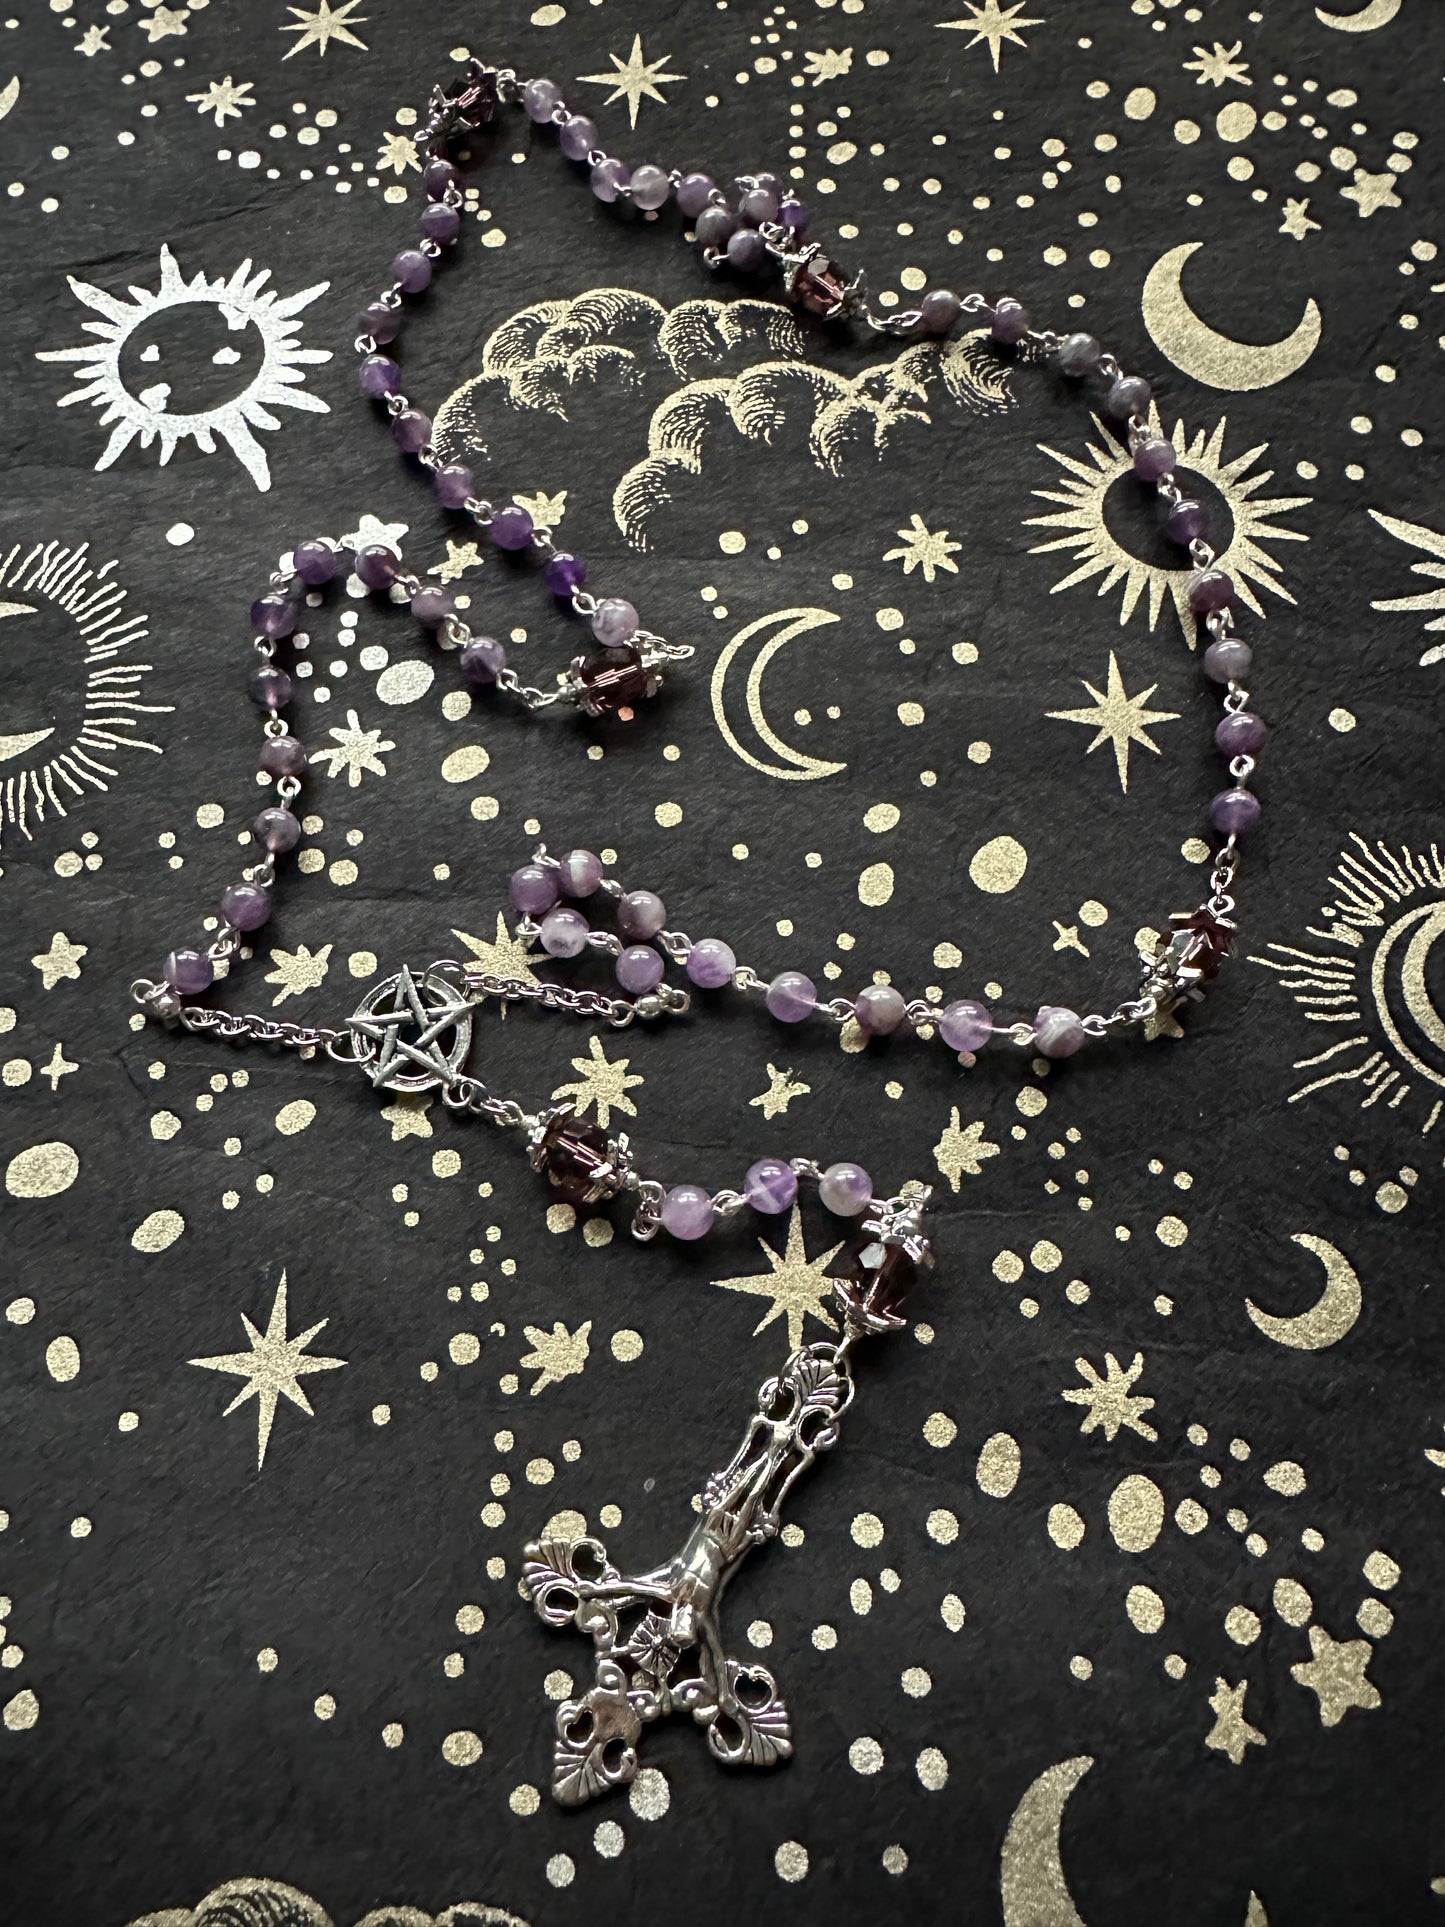 Unholy inverted crucifix rosary with amethyst beads